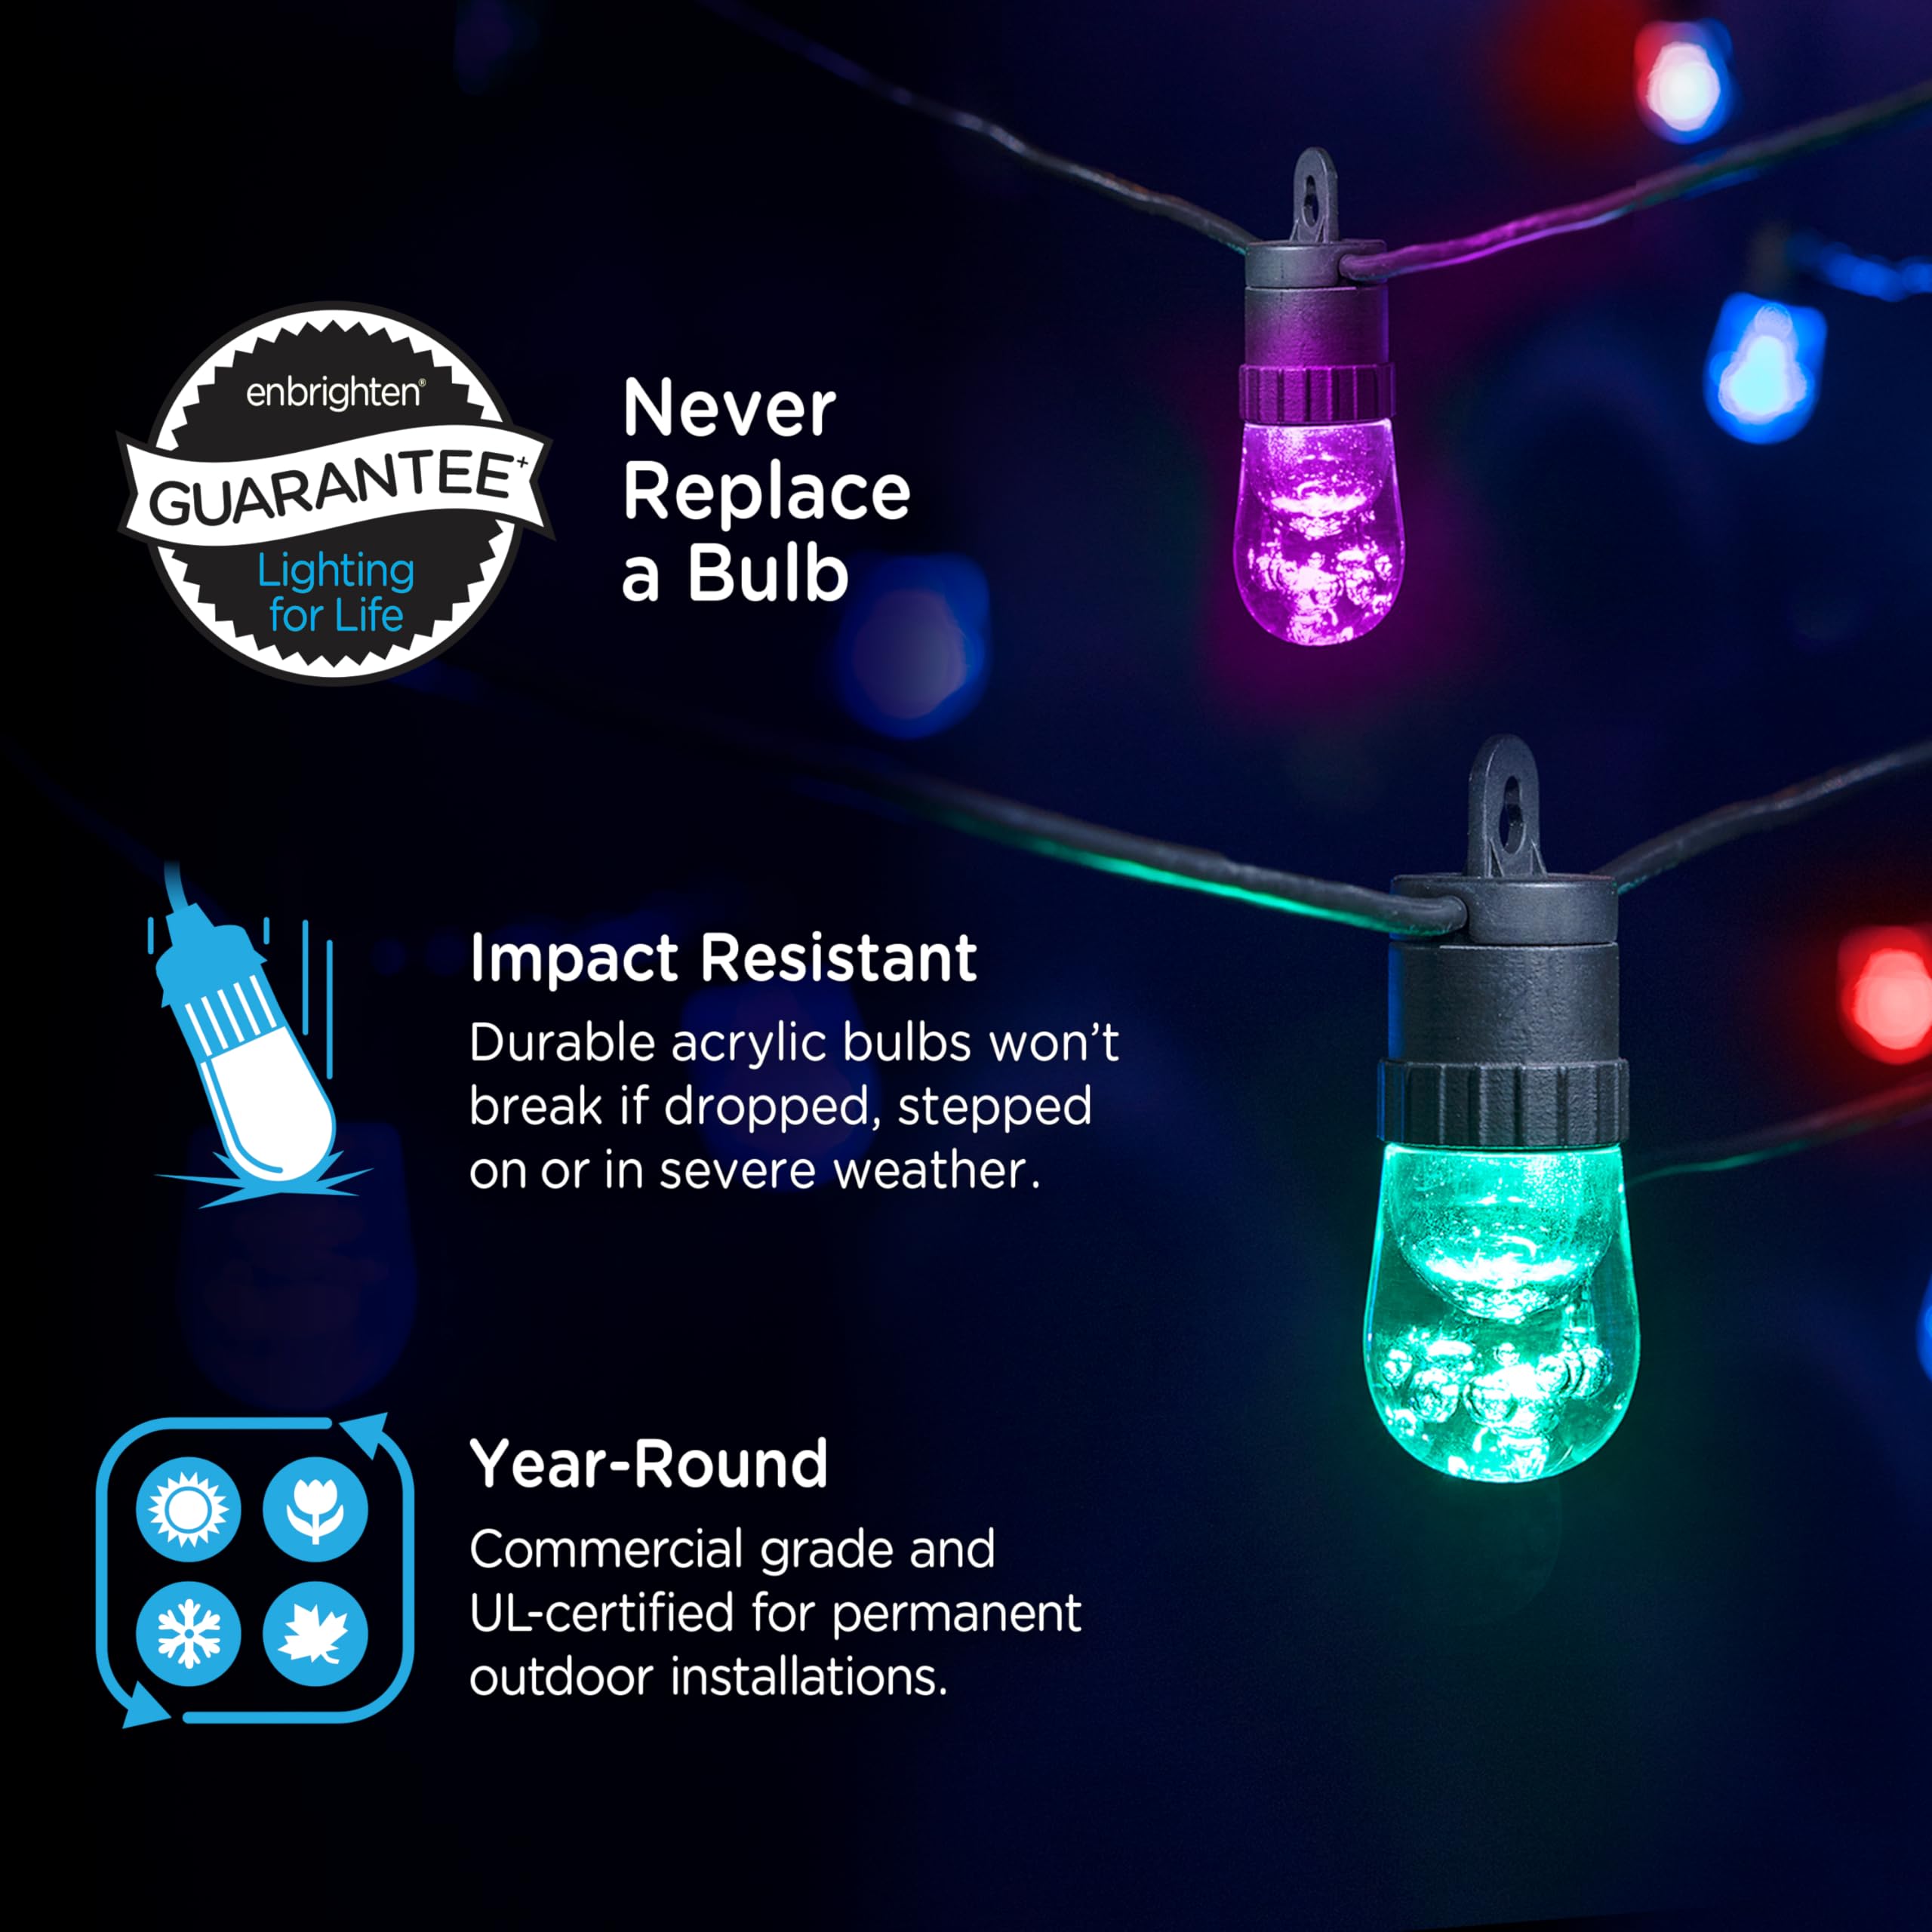 Enbrighten LED Premium Smart Color Changing String Lights, 24ft Black Cord, 12 Shatterproof Acrylic Bulbs, Weatherproof, Customizable, Wi-Fi App Control, Dimmable Outdoor String Lights, 2 Pack, 82764